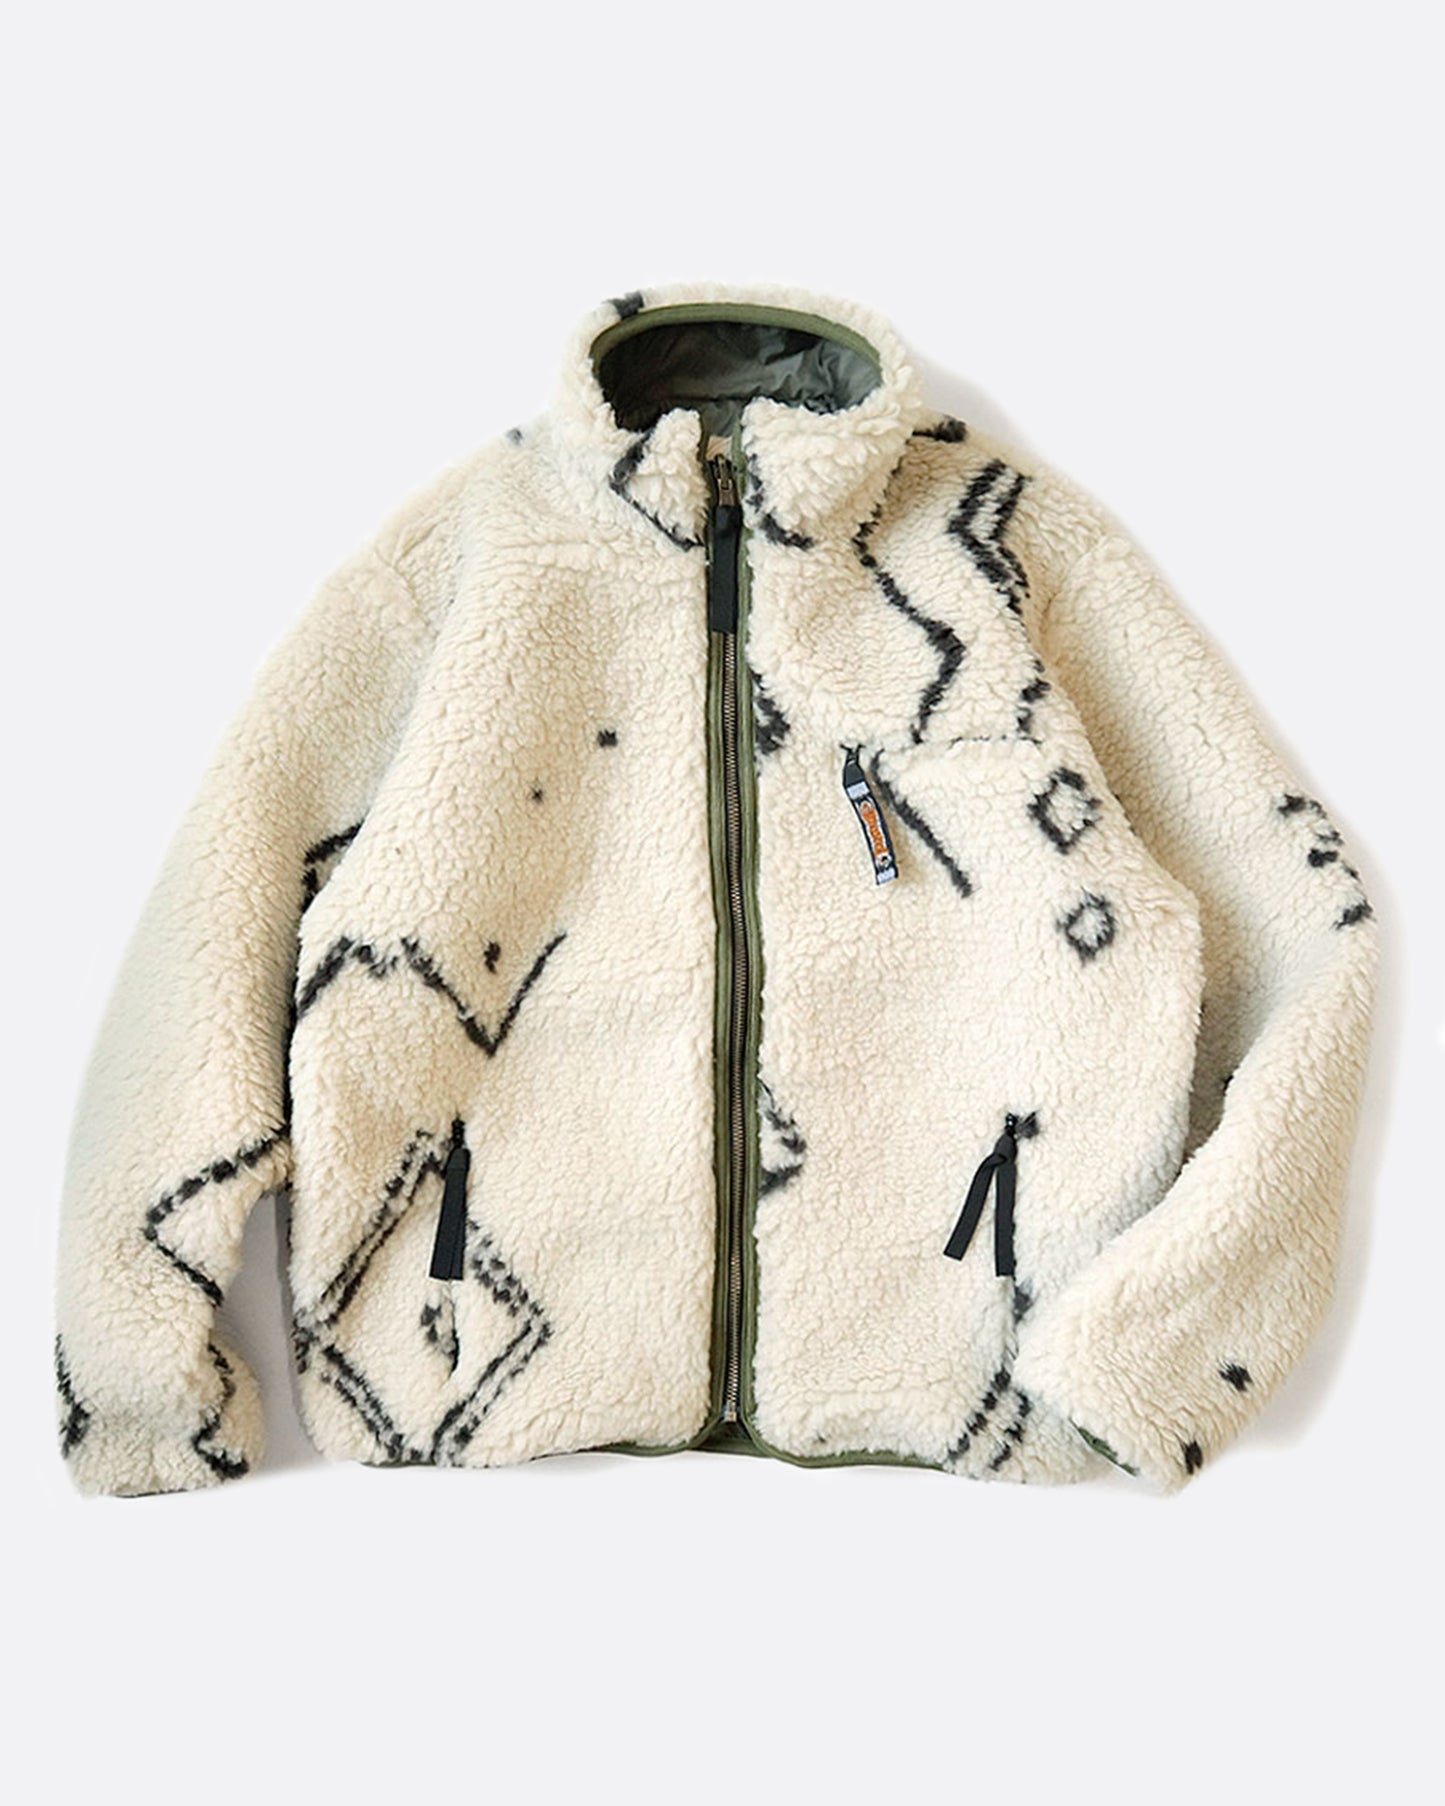 A reverisble jacket with white Beni Ourain patterned fleece on one side and a green nylon shell on the other, shown laying flat on the fleece side.